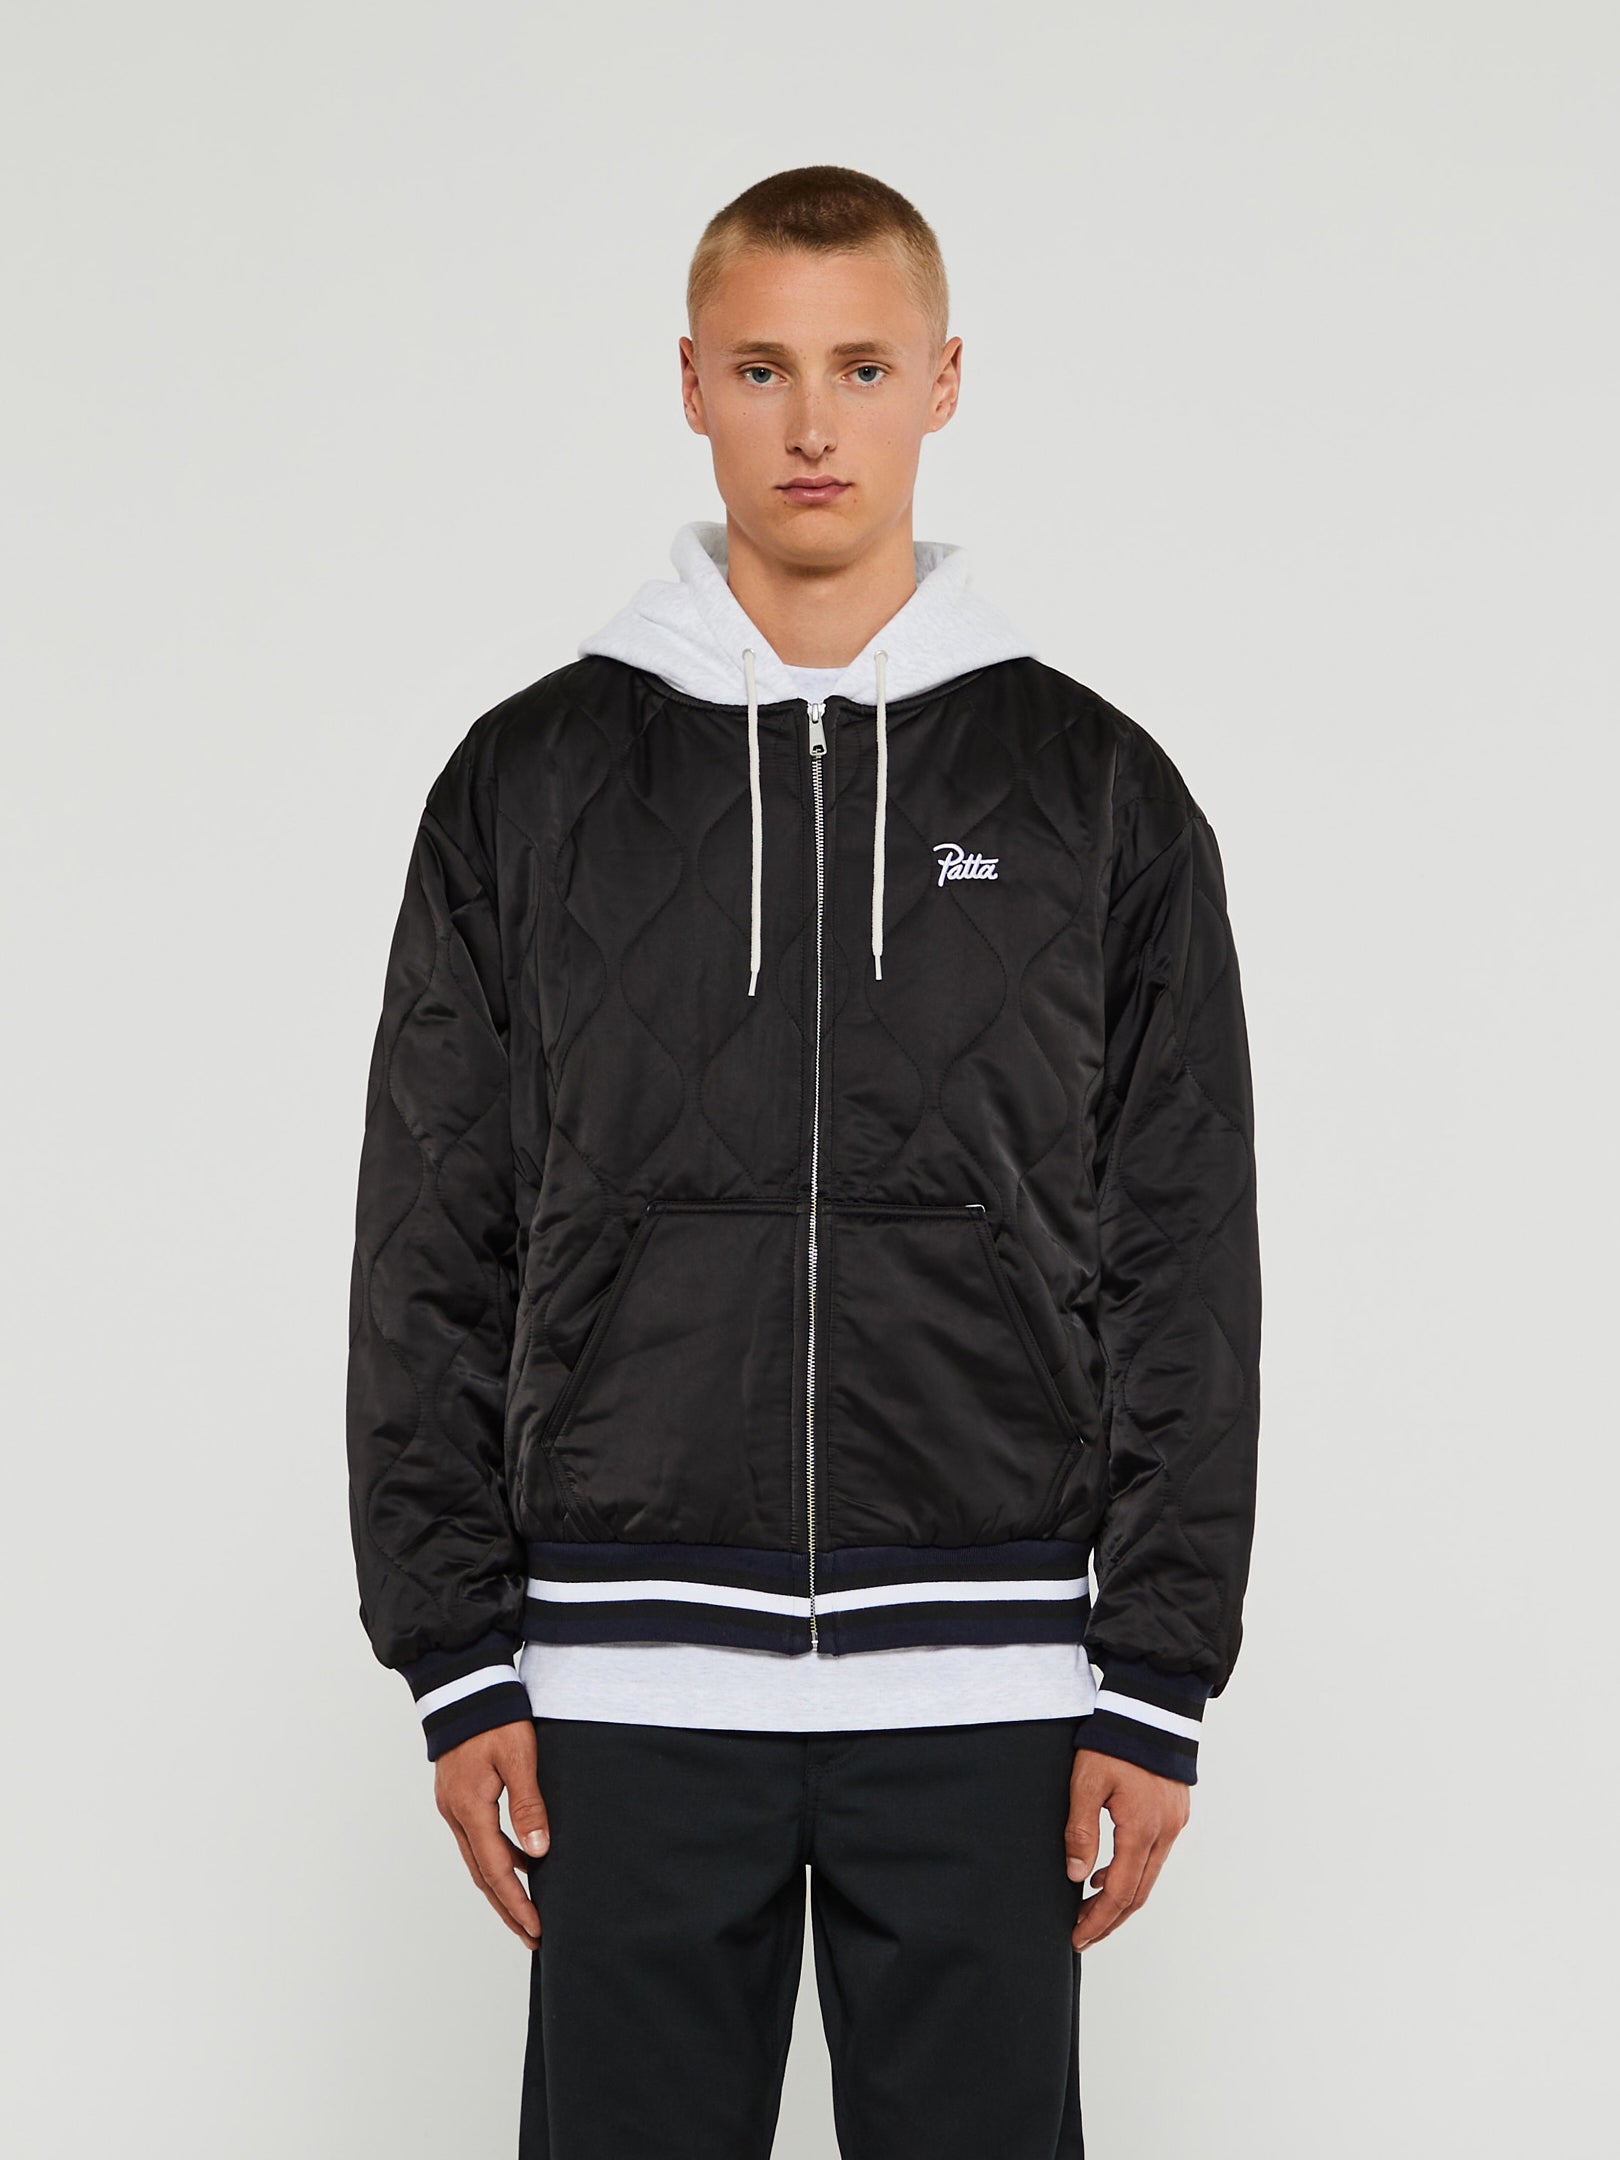 Bomber Jackets  View the assortment at STOY – Page – stoy